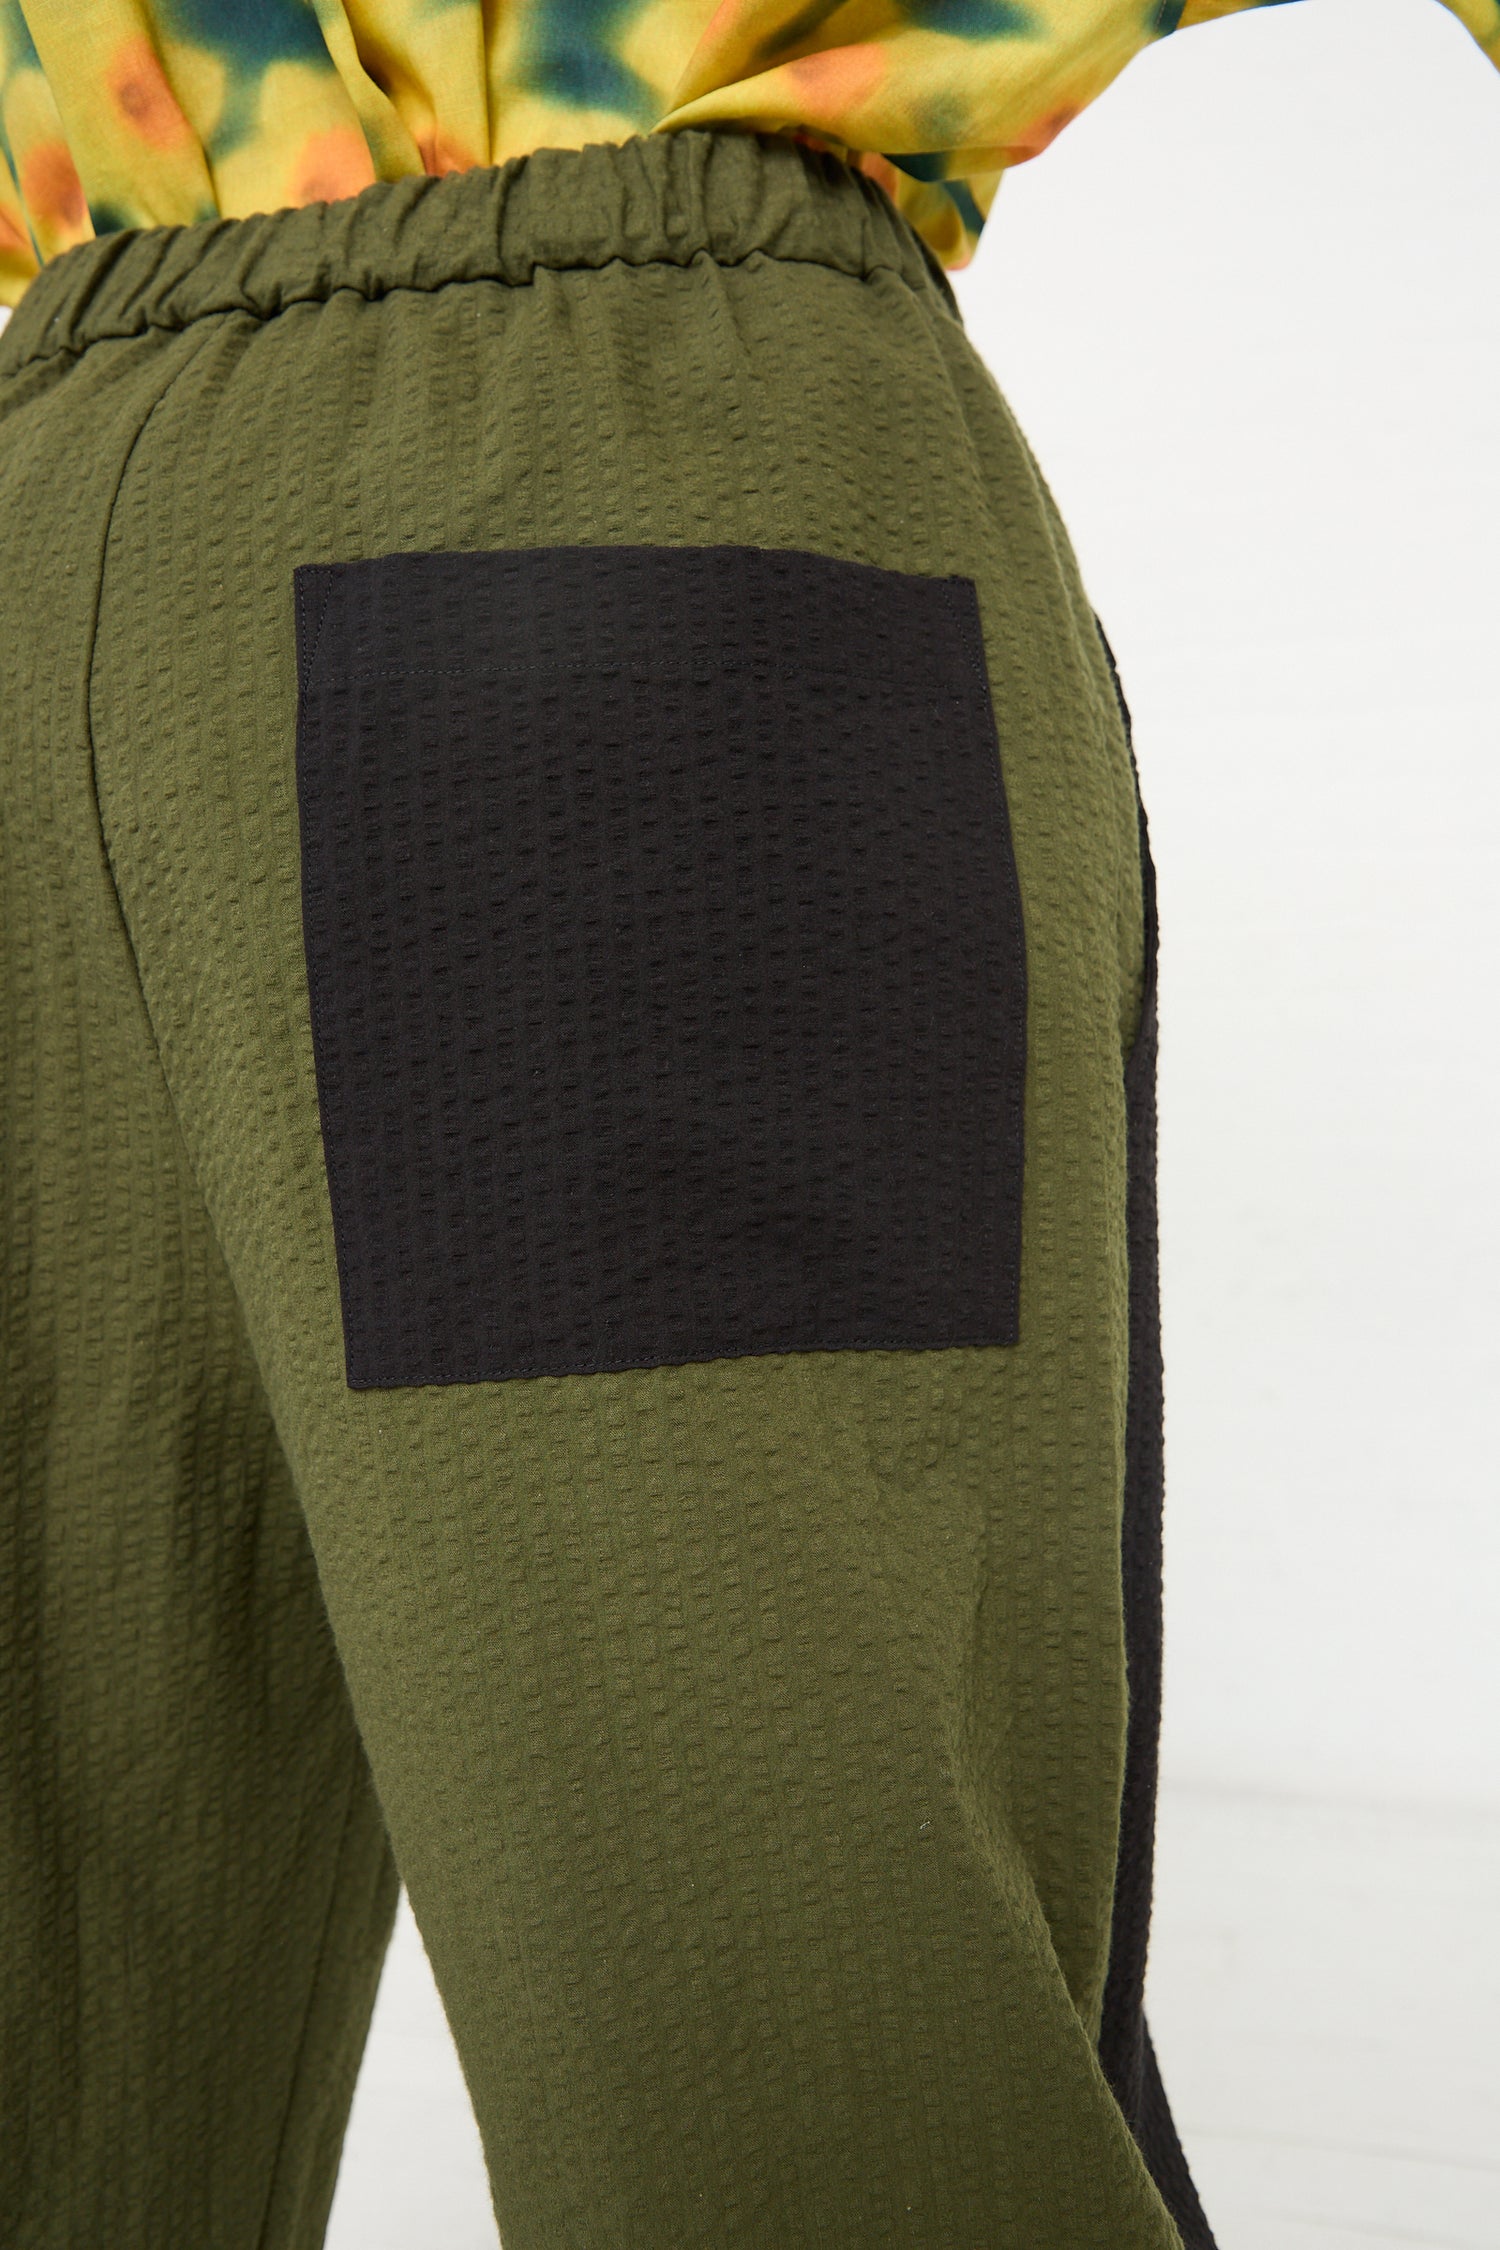 Close-up of KasMaria Cotton Seersucker Work Pant in Combo Color with a dark patch on the pocket area.